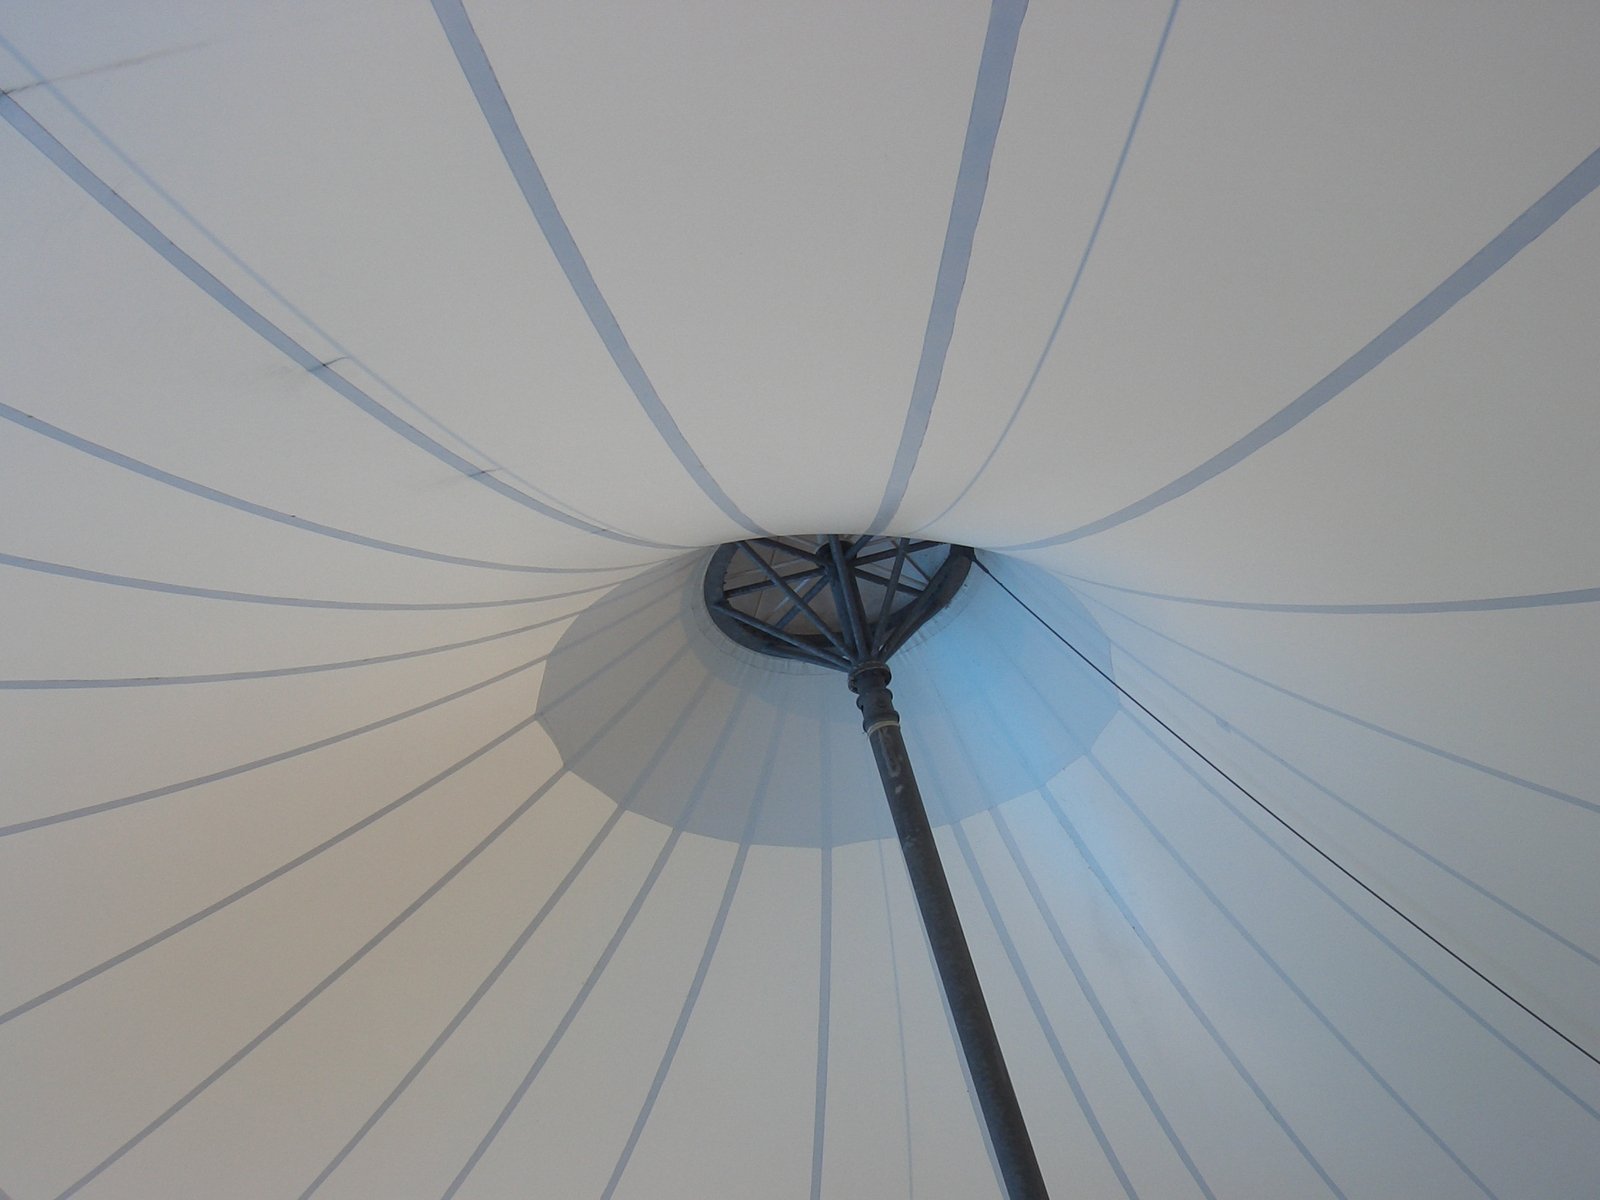 a large umbrella covering with lines coming down from it